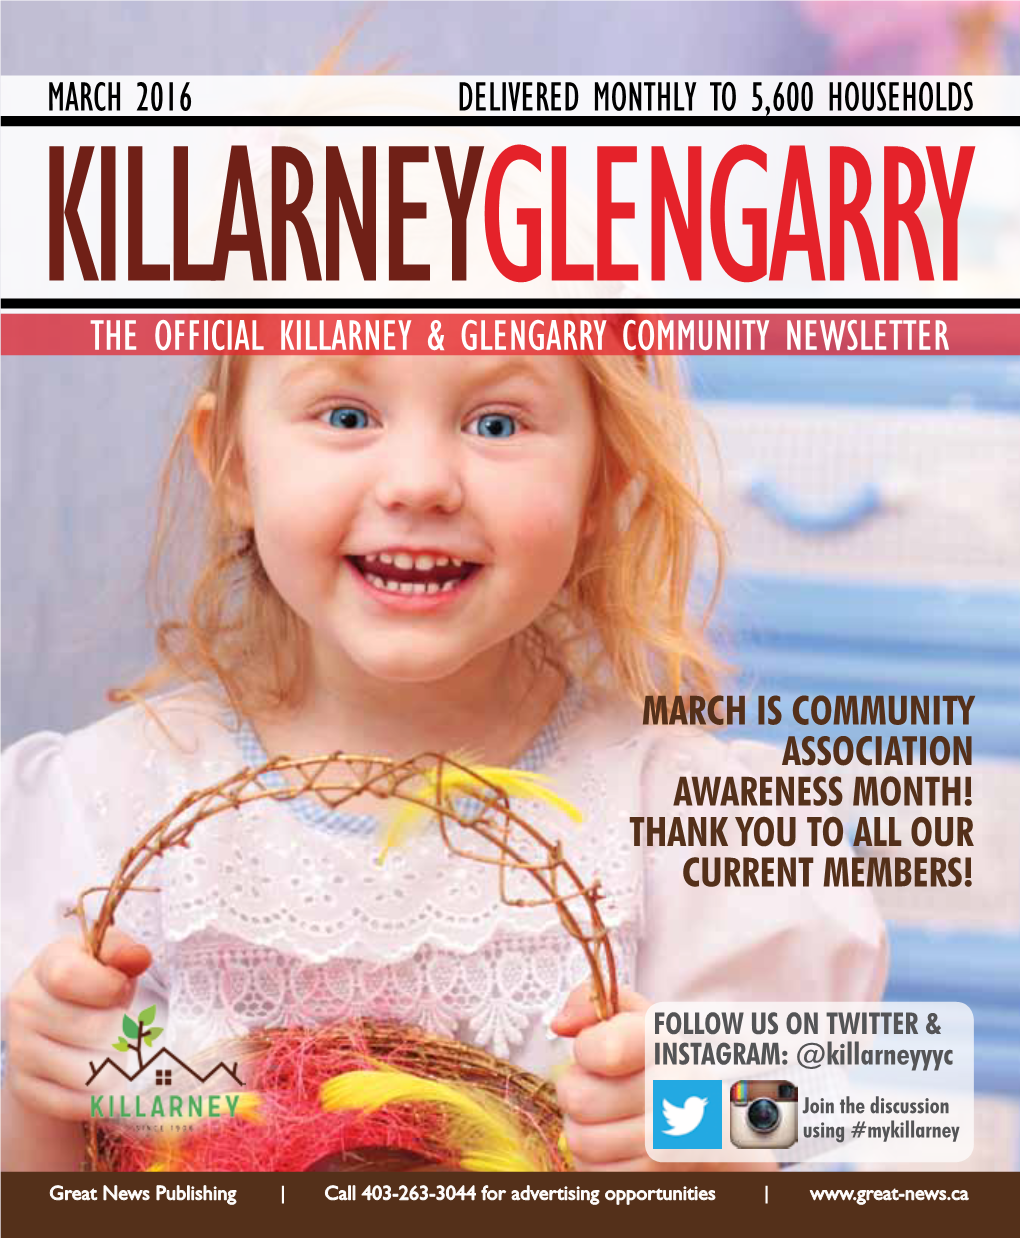 The Official Killarney & Glengarry Community